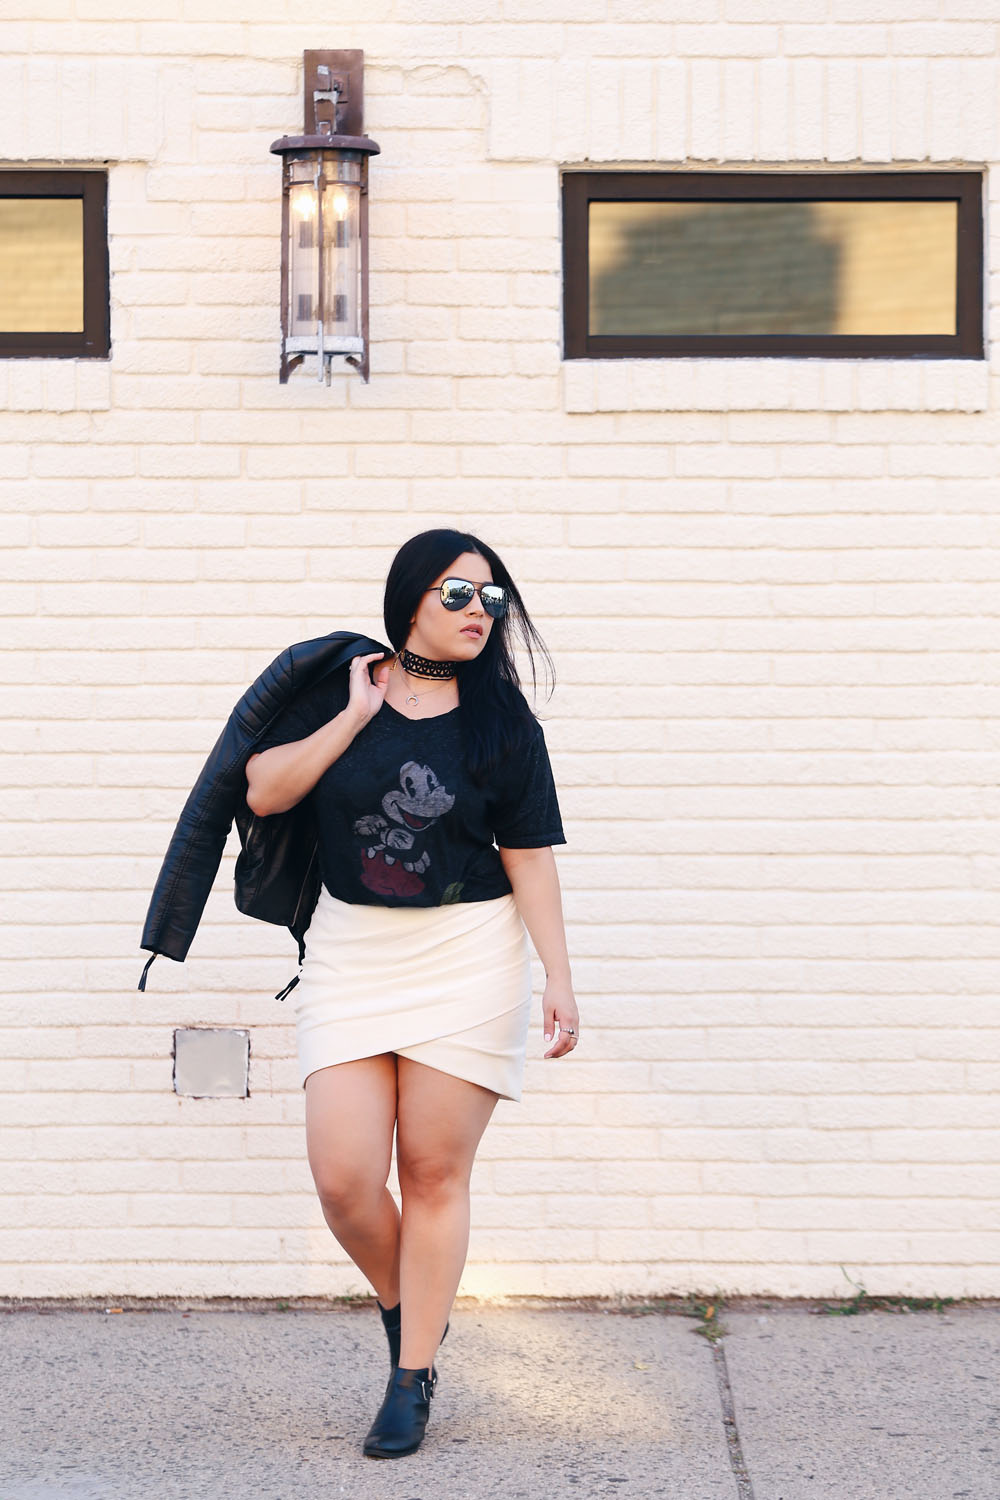 How to Style a Mini Skirt: 7 Outfit Ideas